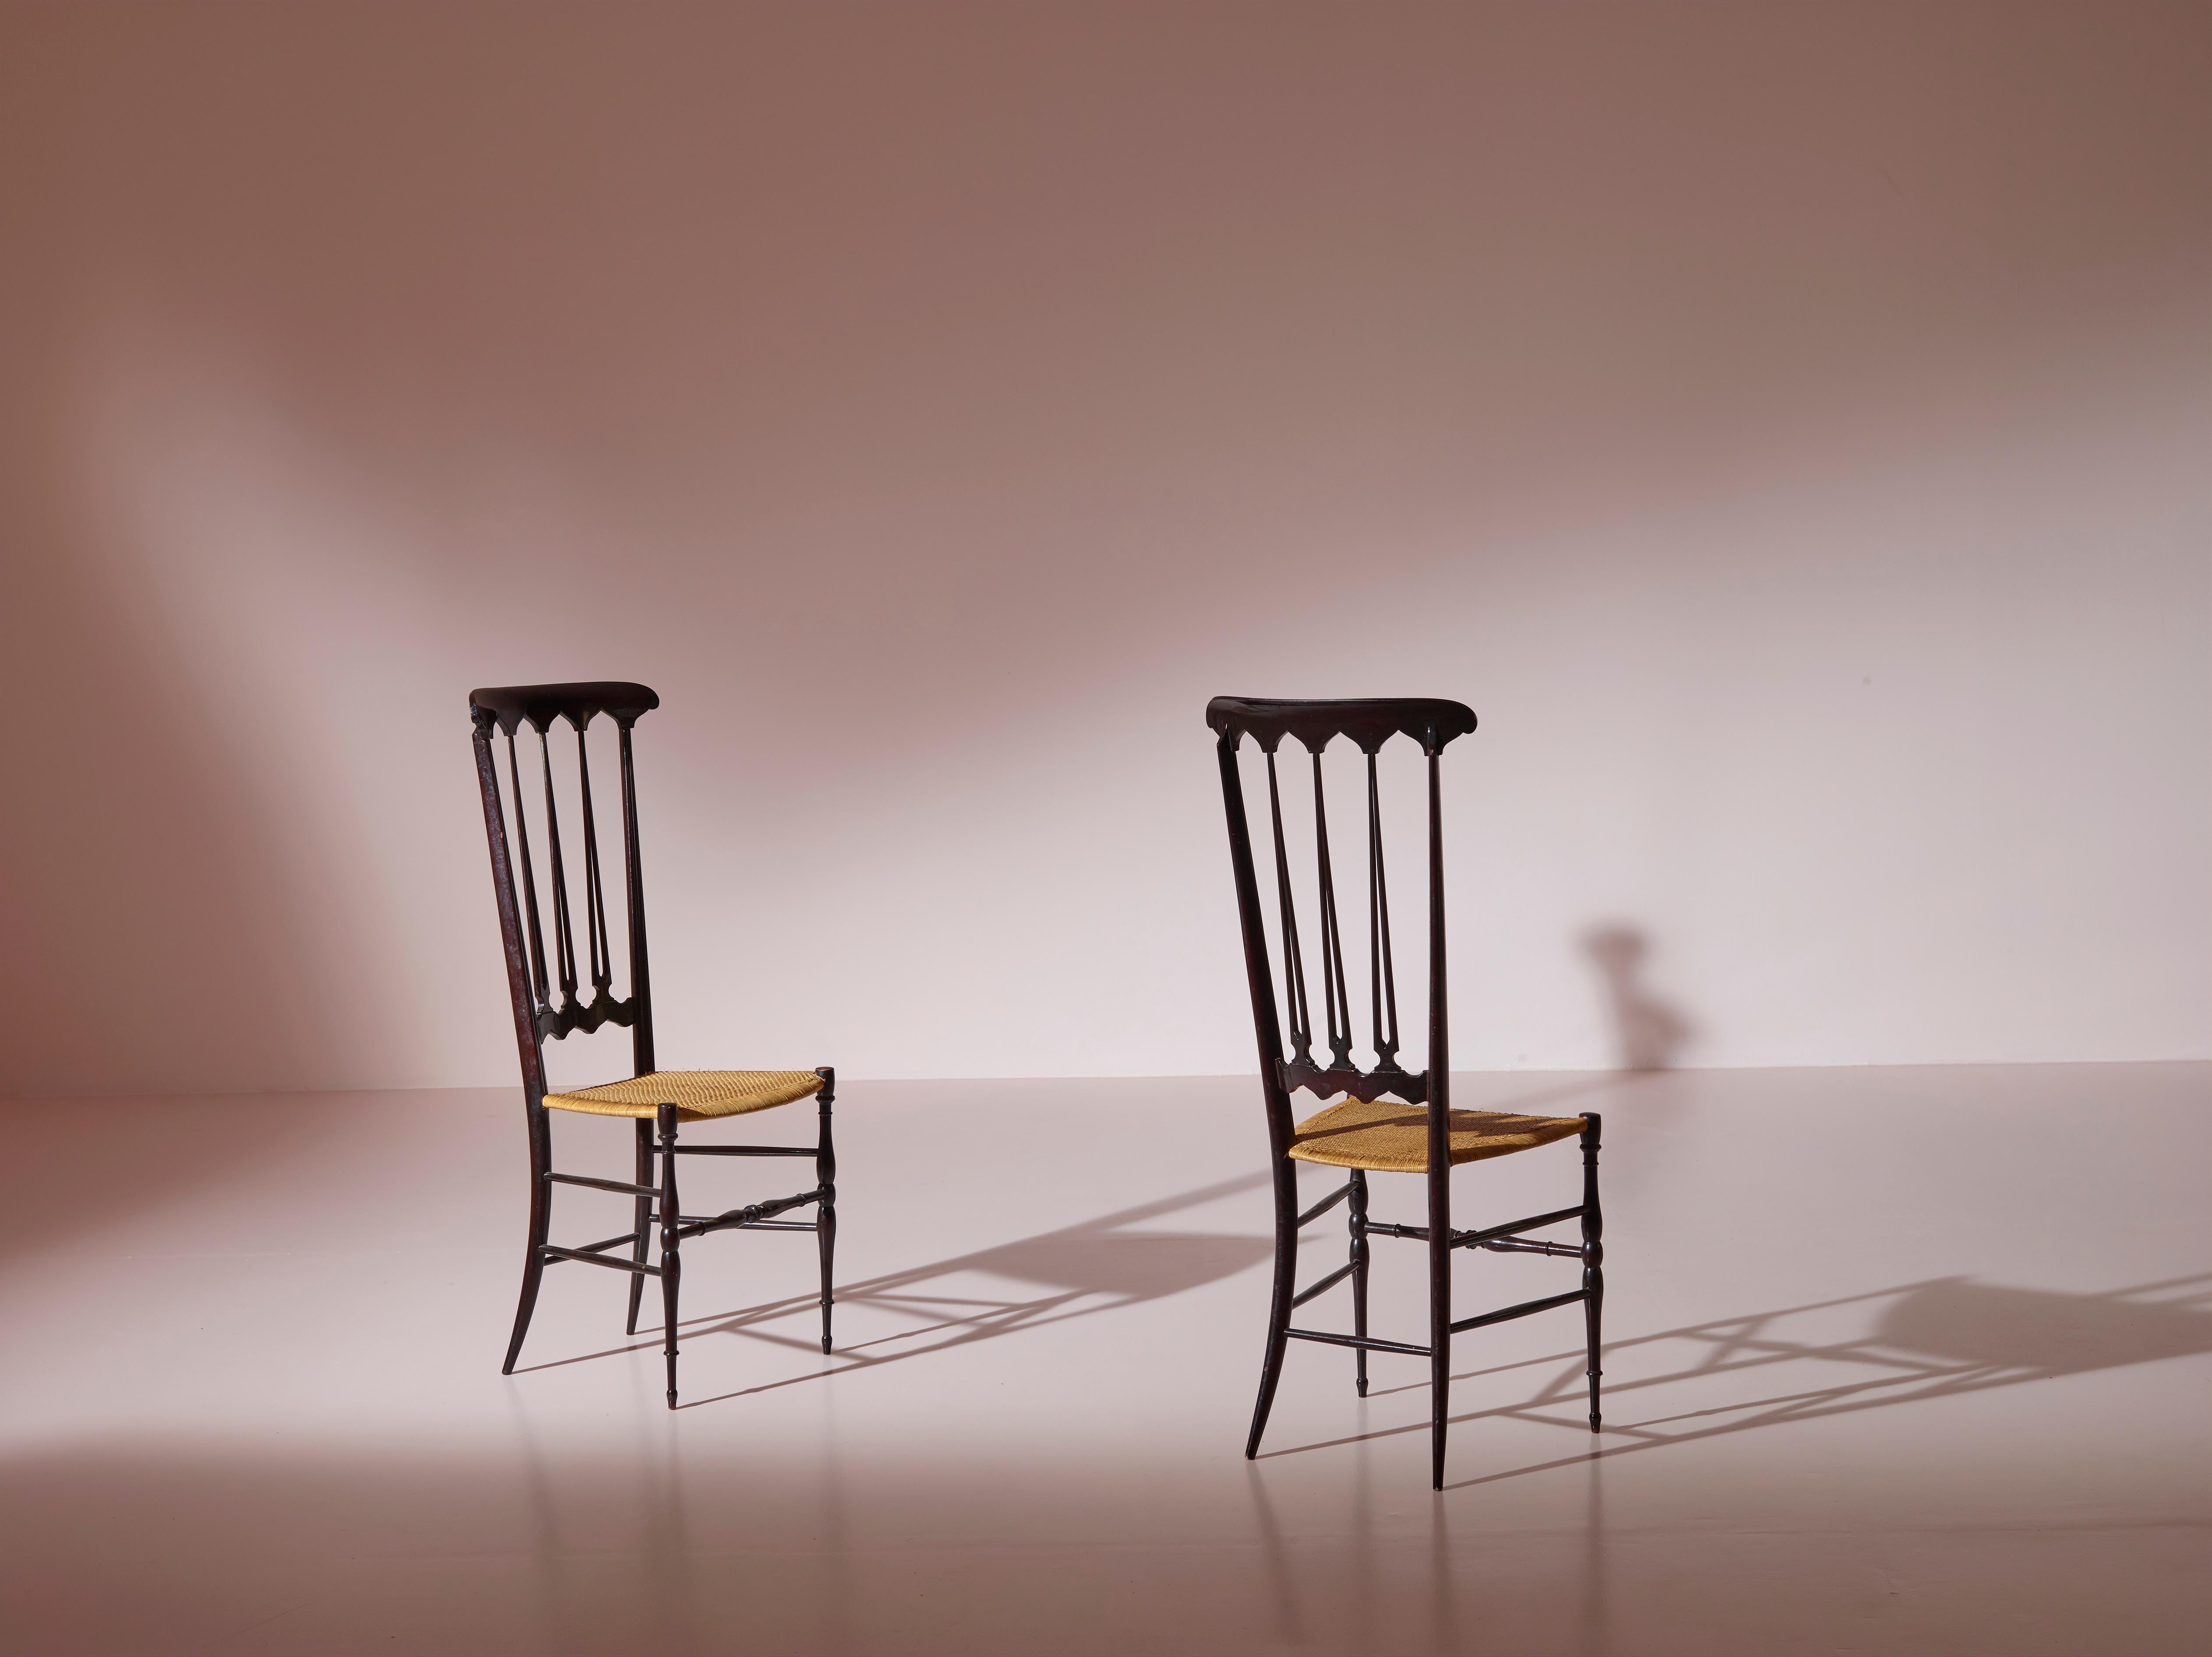 Italian Pair of Cane and Beech ''Spade'' High Back Chairs Made in Chiavari, Italy 1960s For Sale